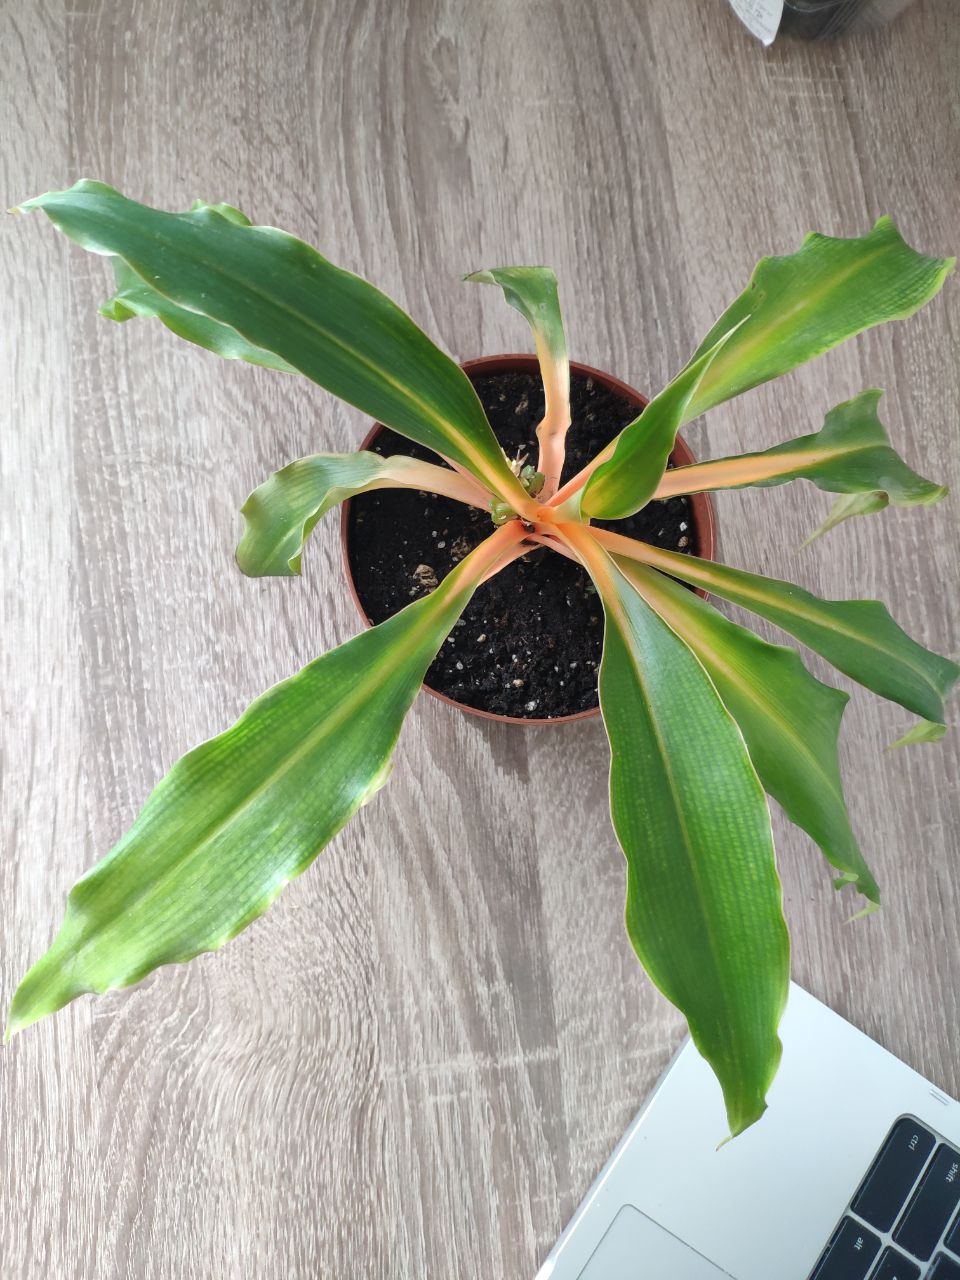 Spider Plant 'Green Orange' a plant for everyone